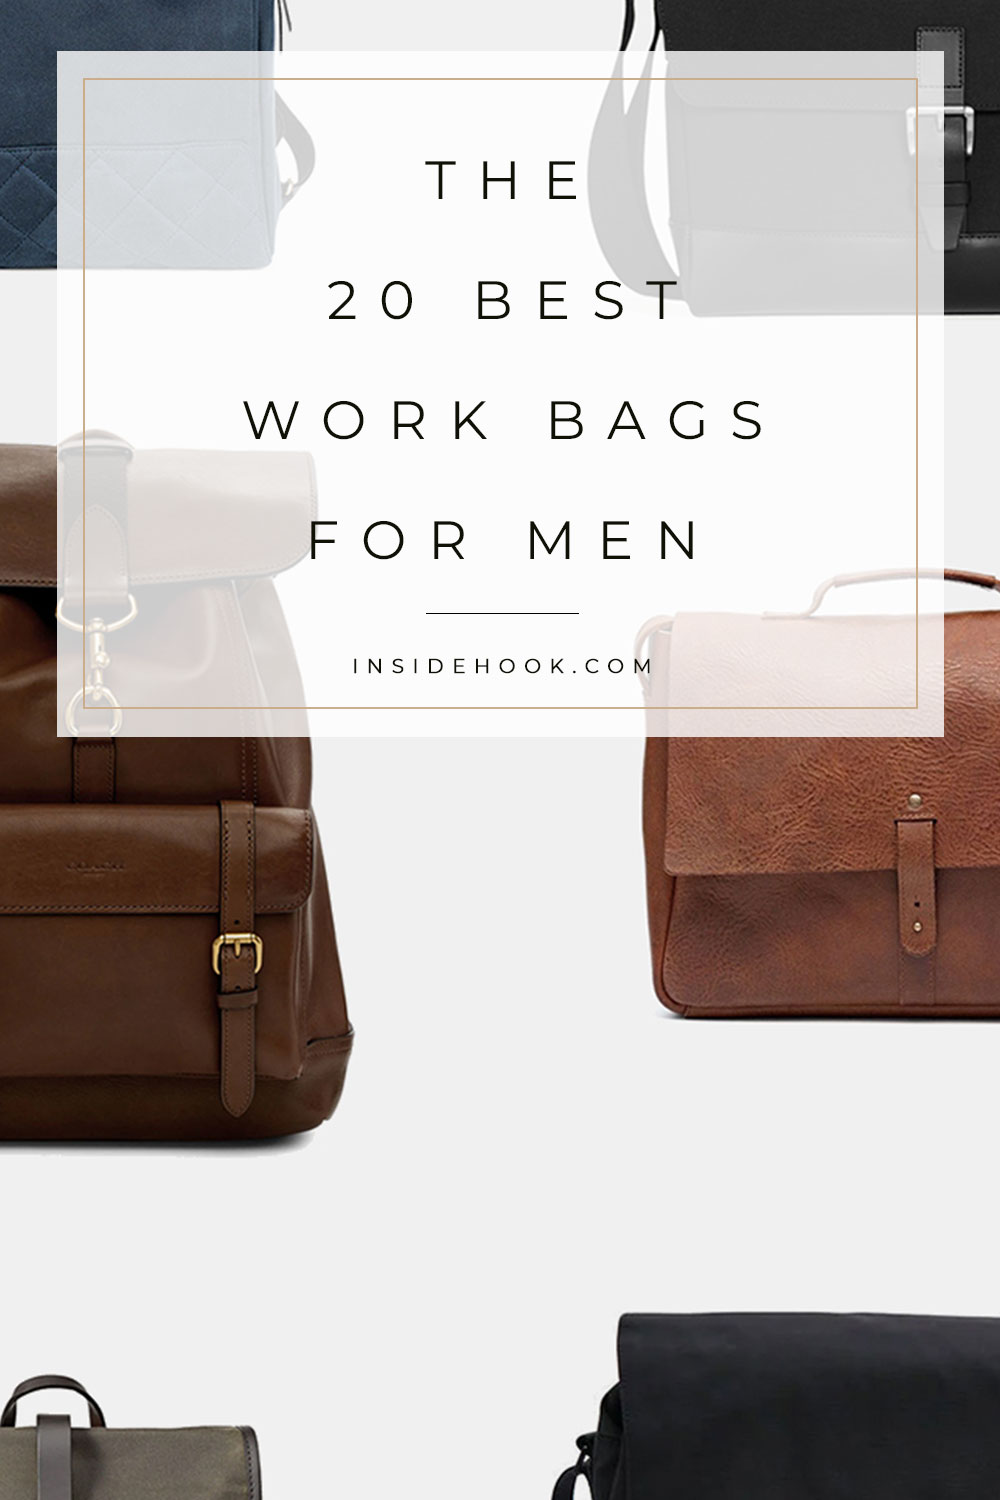 The 12 Best Office Bags For Men